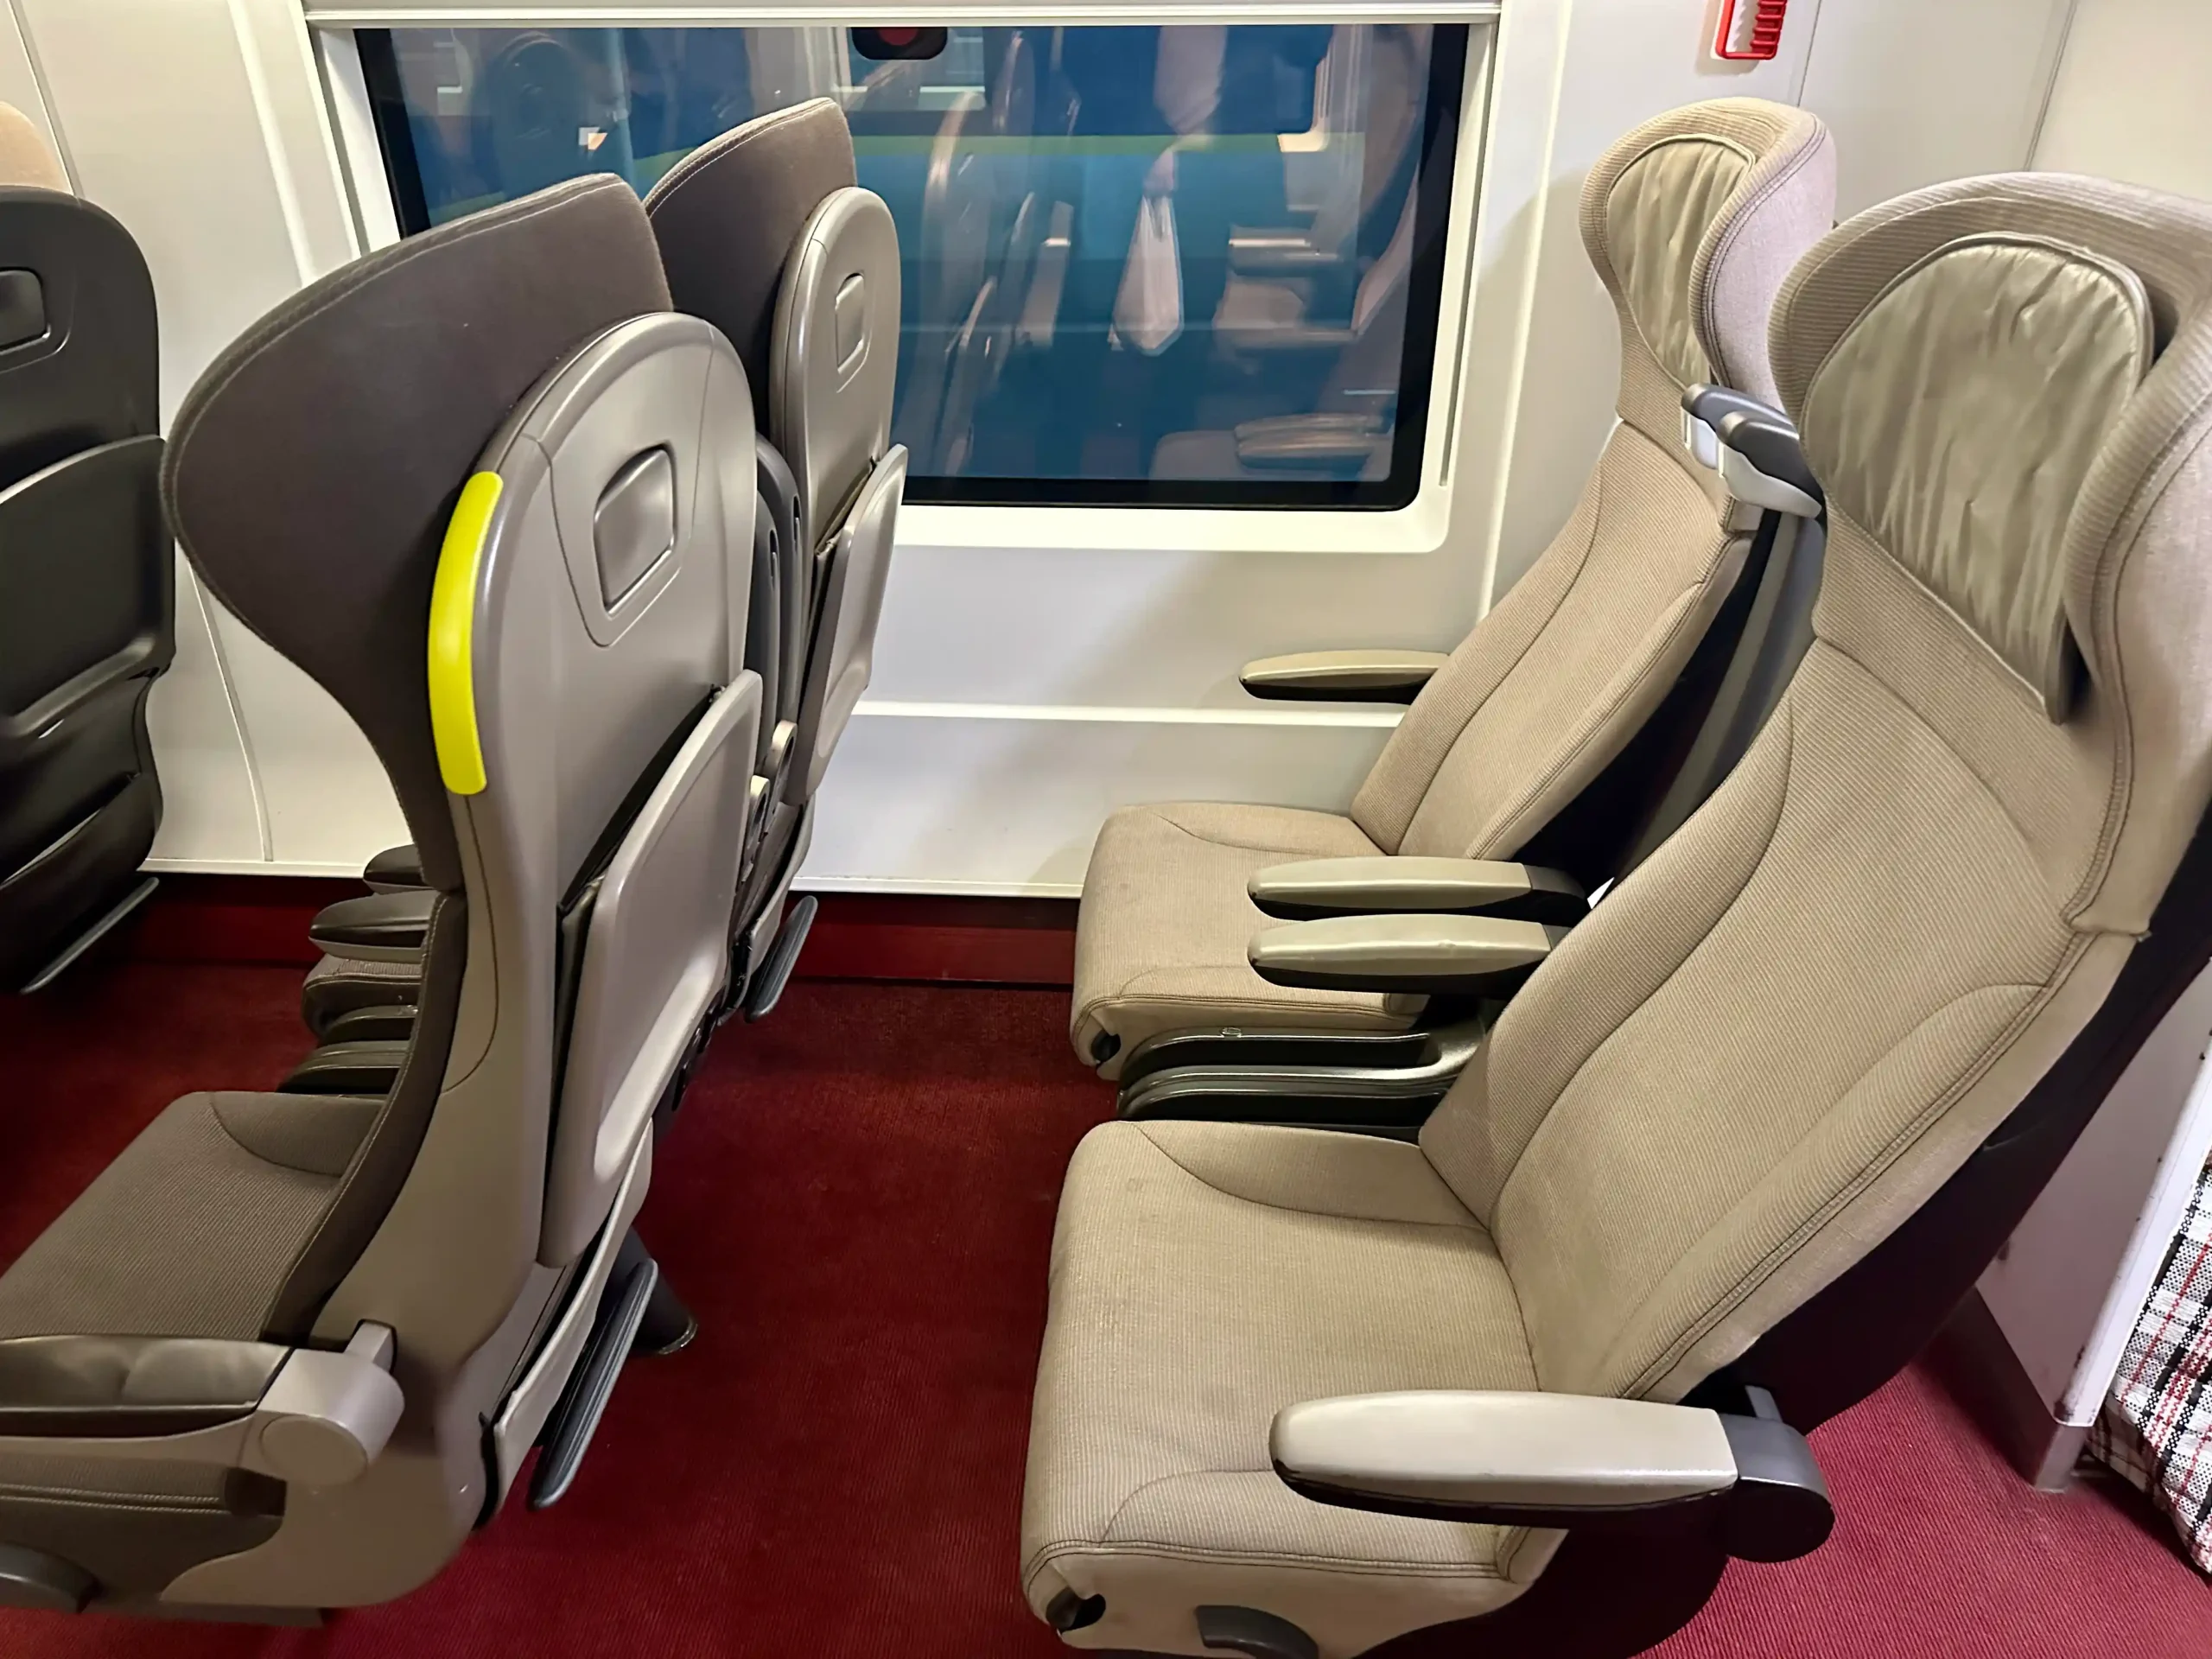 a row of seats in a train